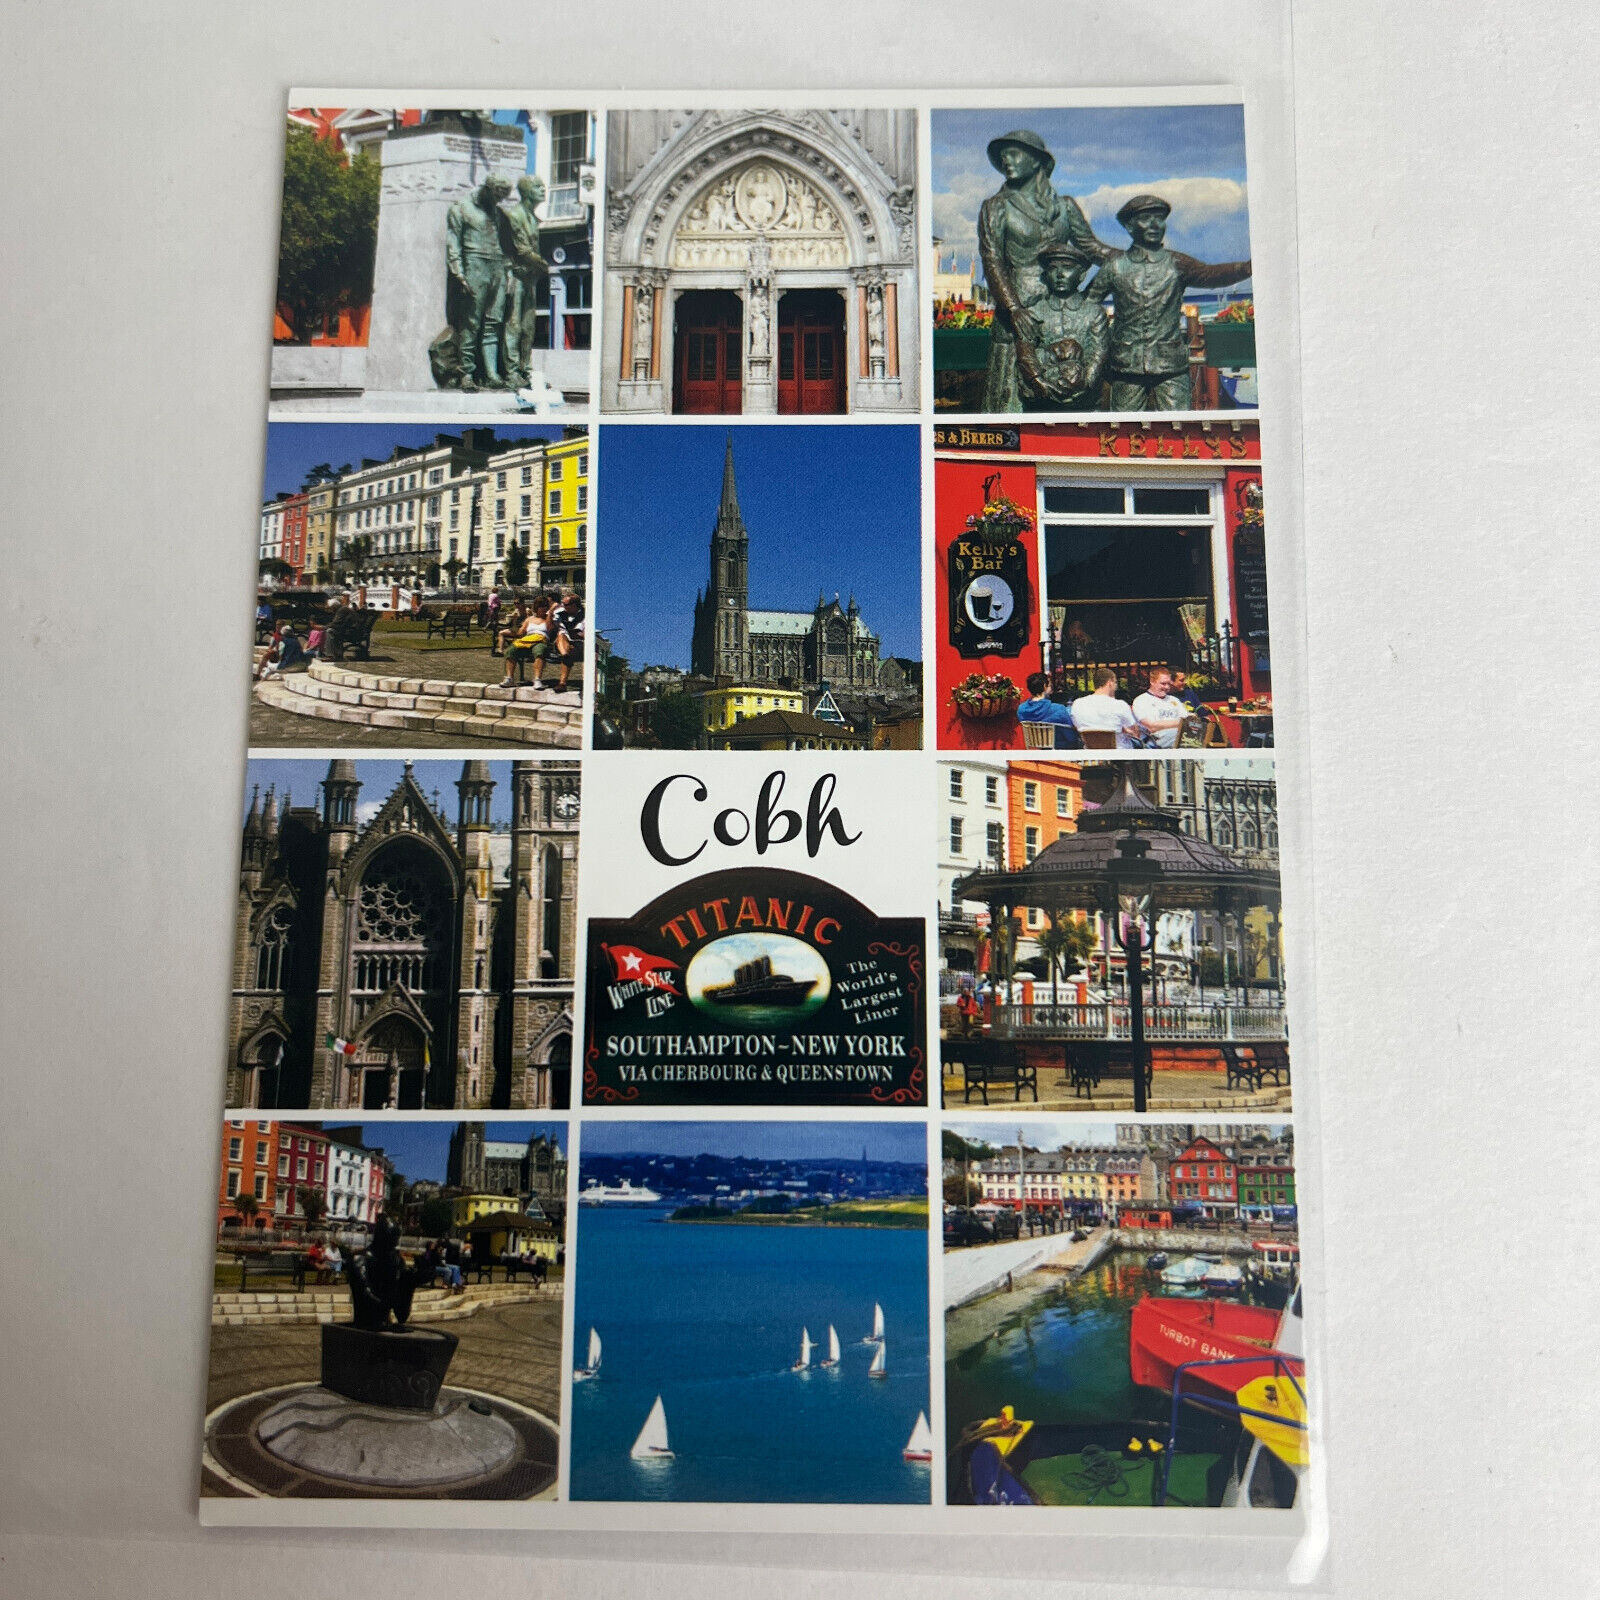 Greetings from Ireland Cobh Collage Cathedreal Ocean Statue Postcard